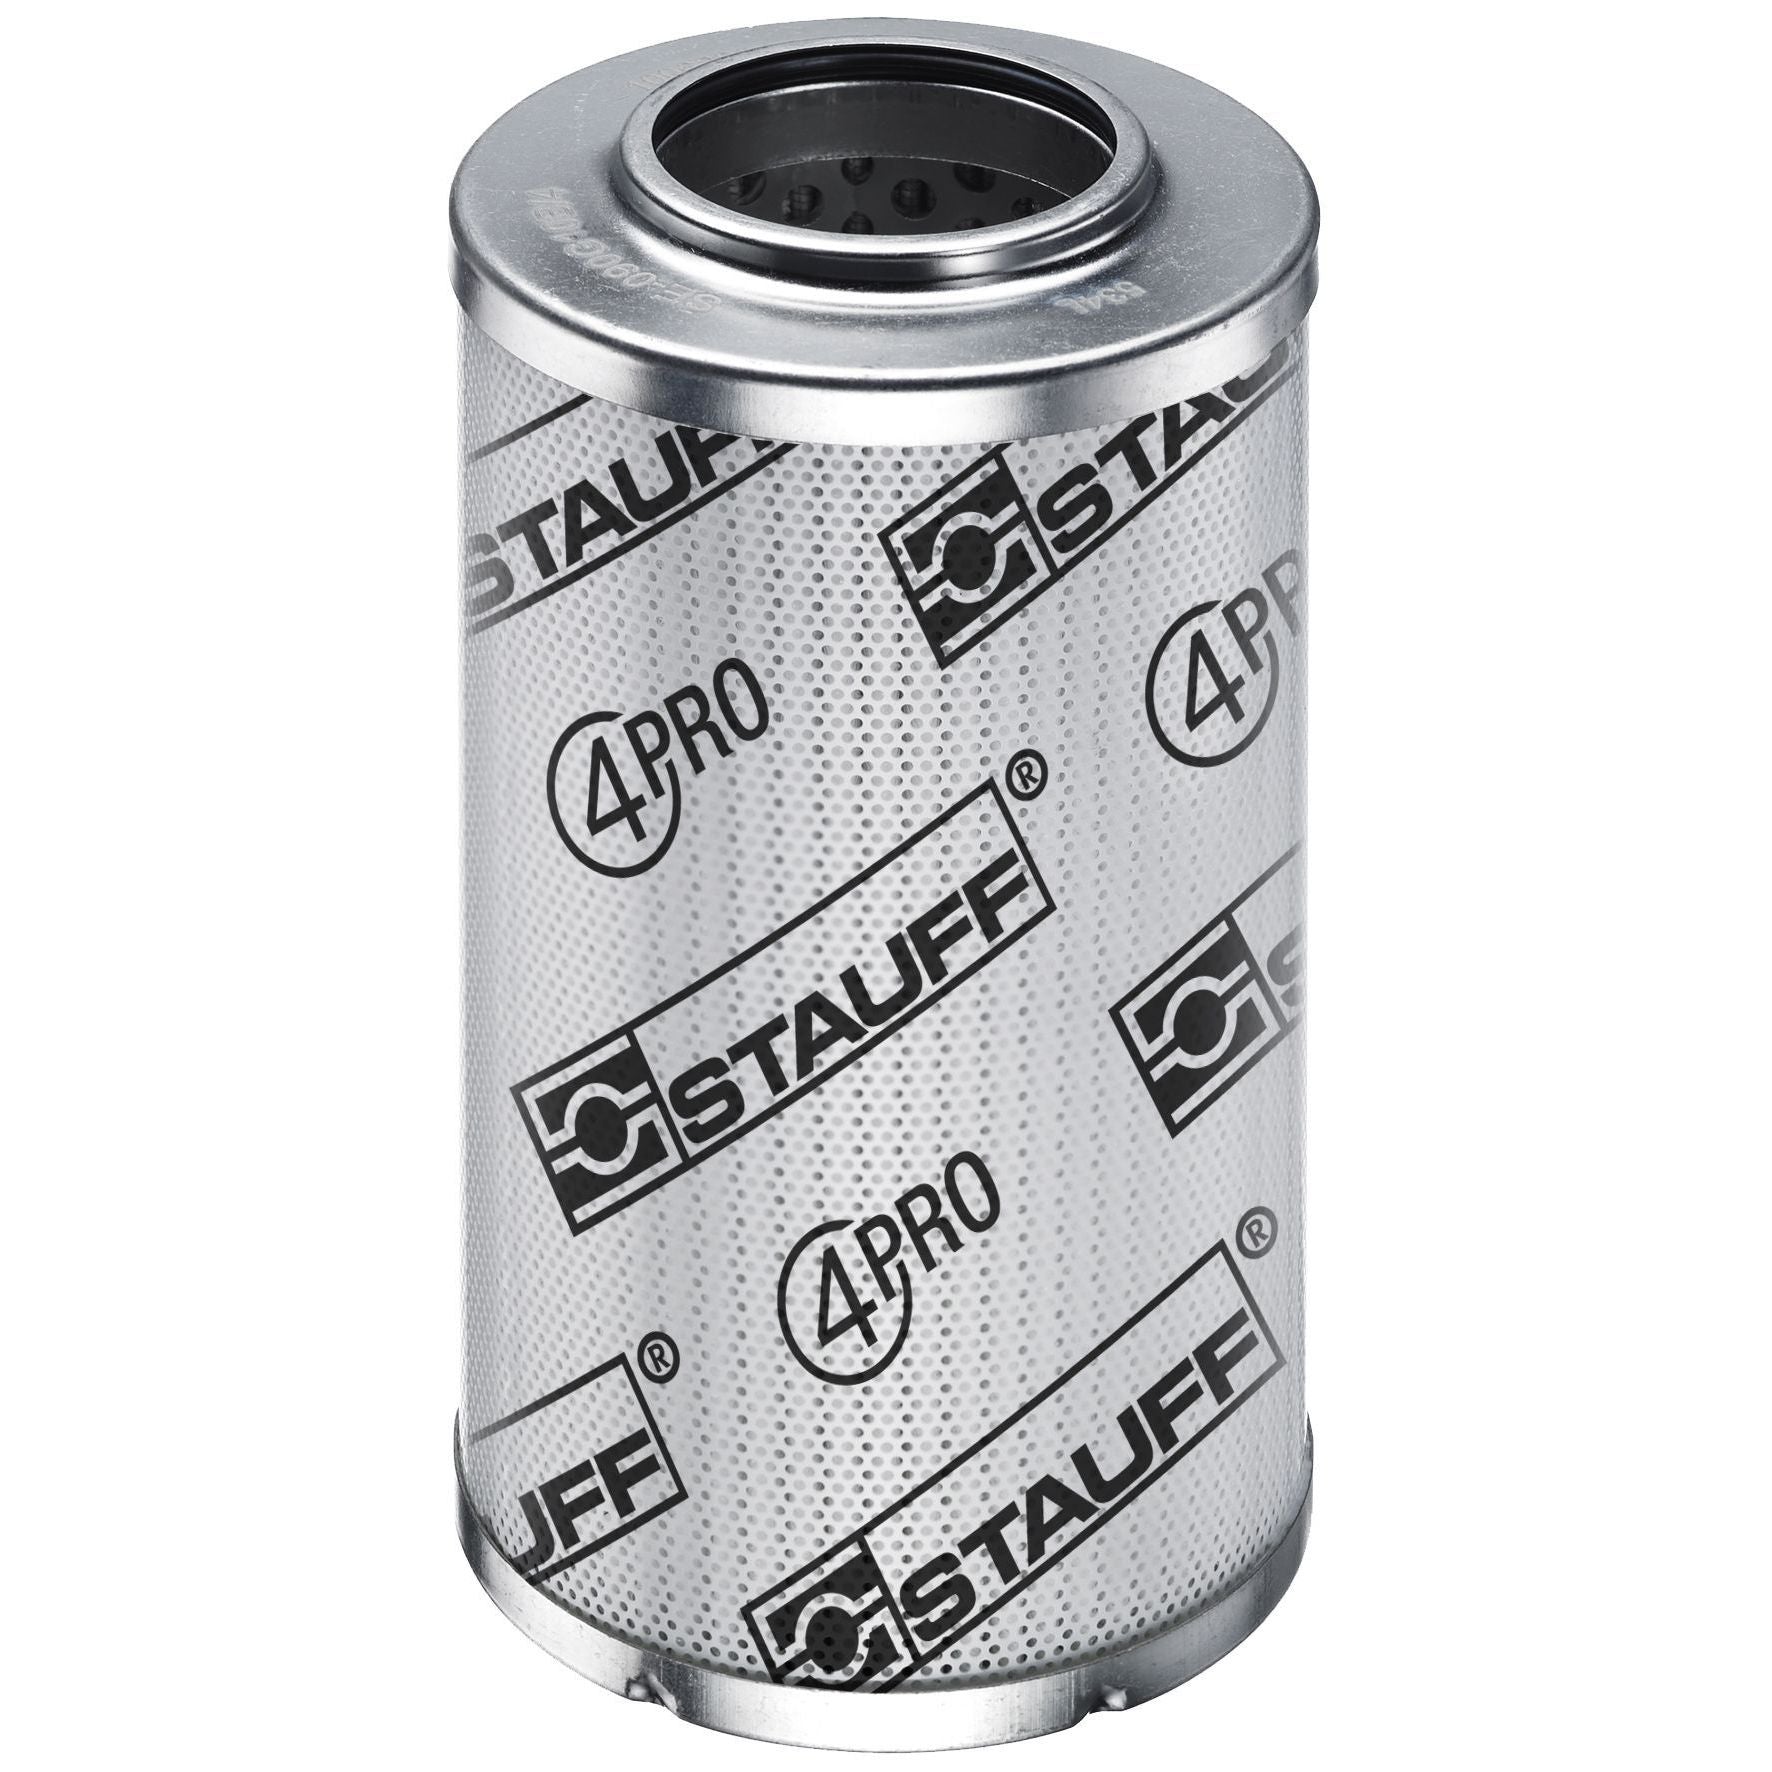 SE-300-S-50-B/3 : Stauff SF-300 Series Filter Element, 50 Micron, Stainless Mesh Media, 3045psi Collapse Differential, Buna